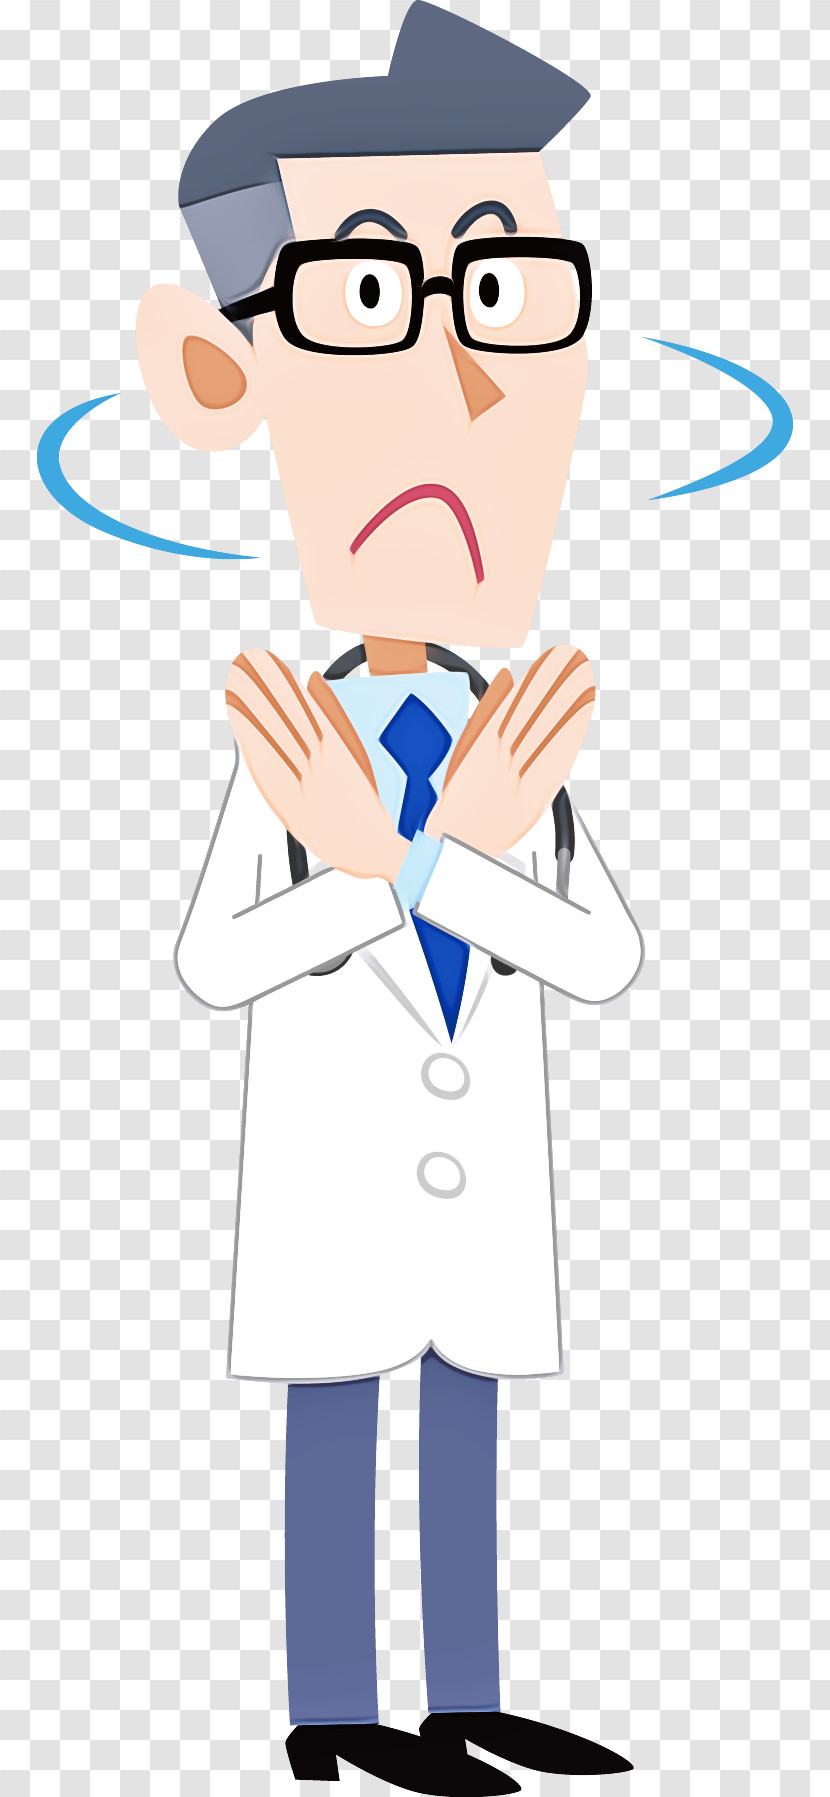 Royalty-free Health Drawing Fotolia Physician Transparent PNG